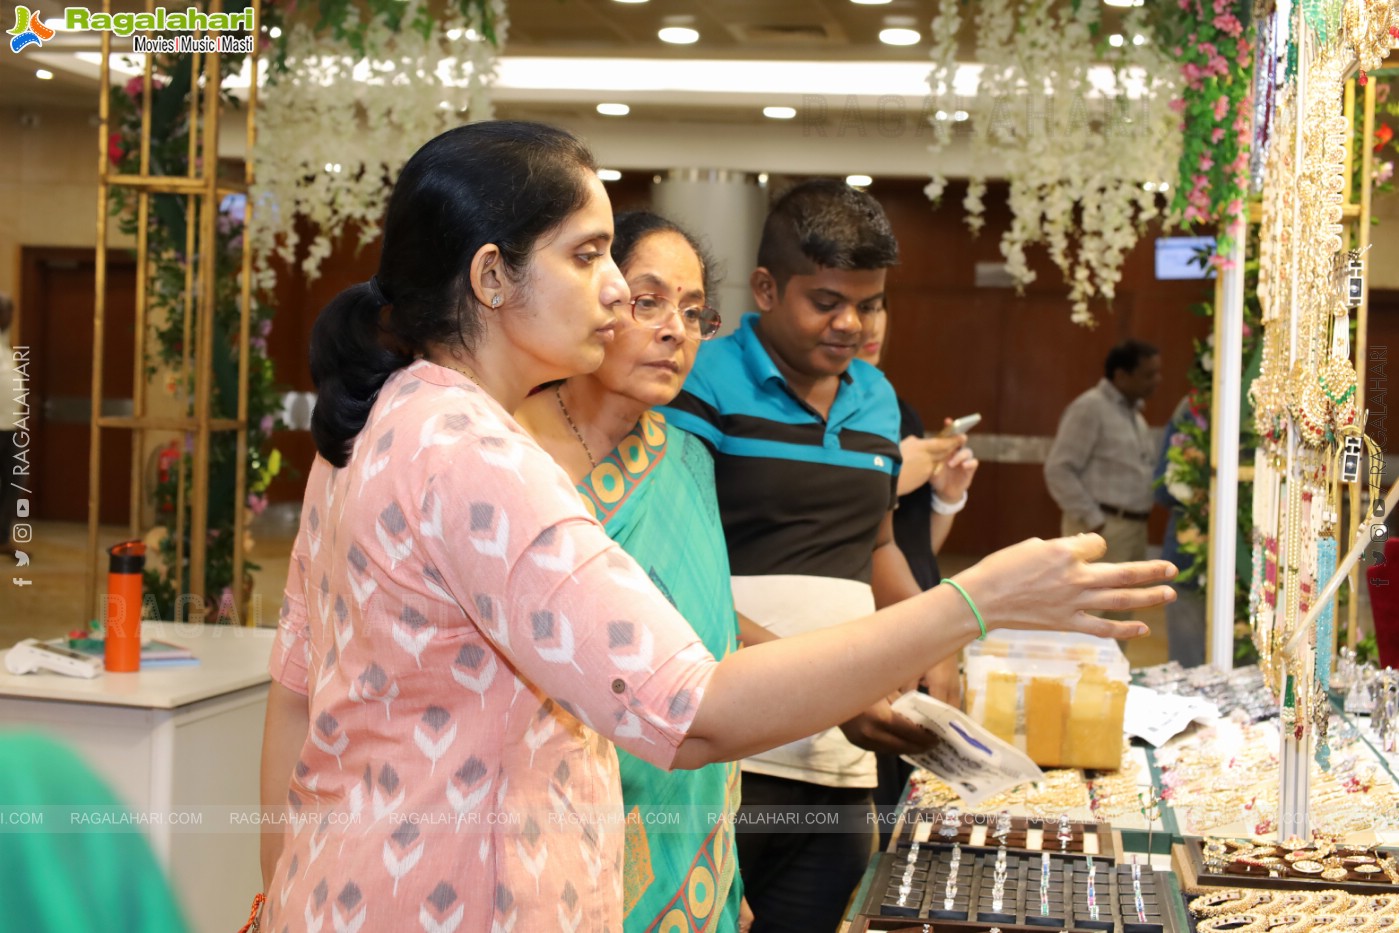 Grand Inauguration of the Sutraa Exhibition at Hotel Novotel (HICC)